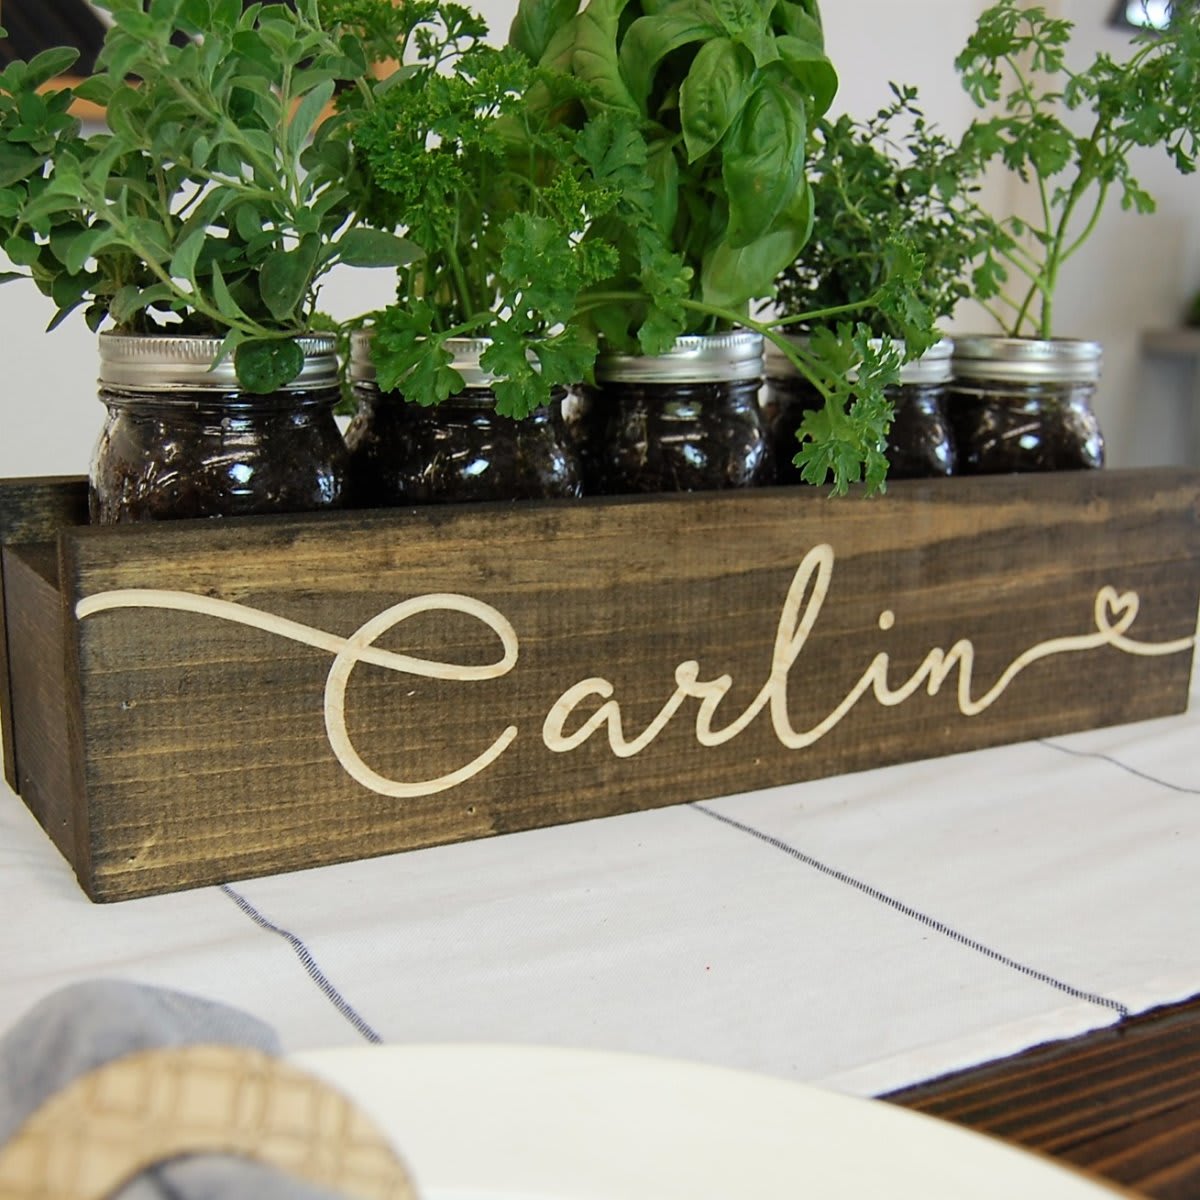 wooden planter box that reads Carlin with mason jars and herbs